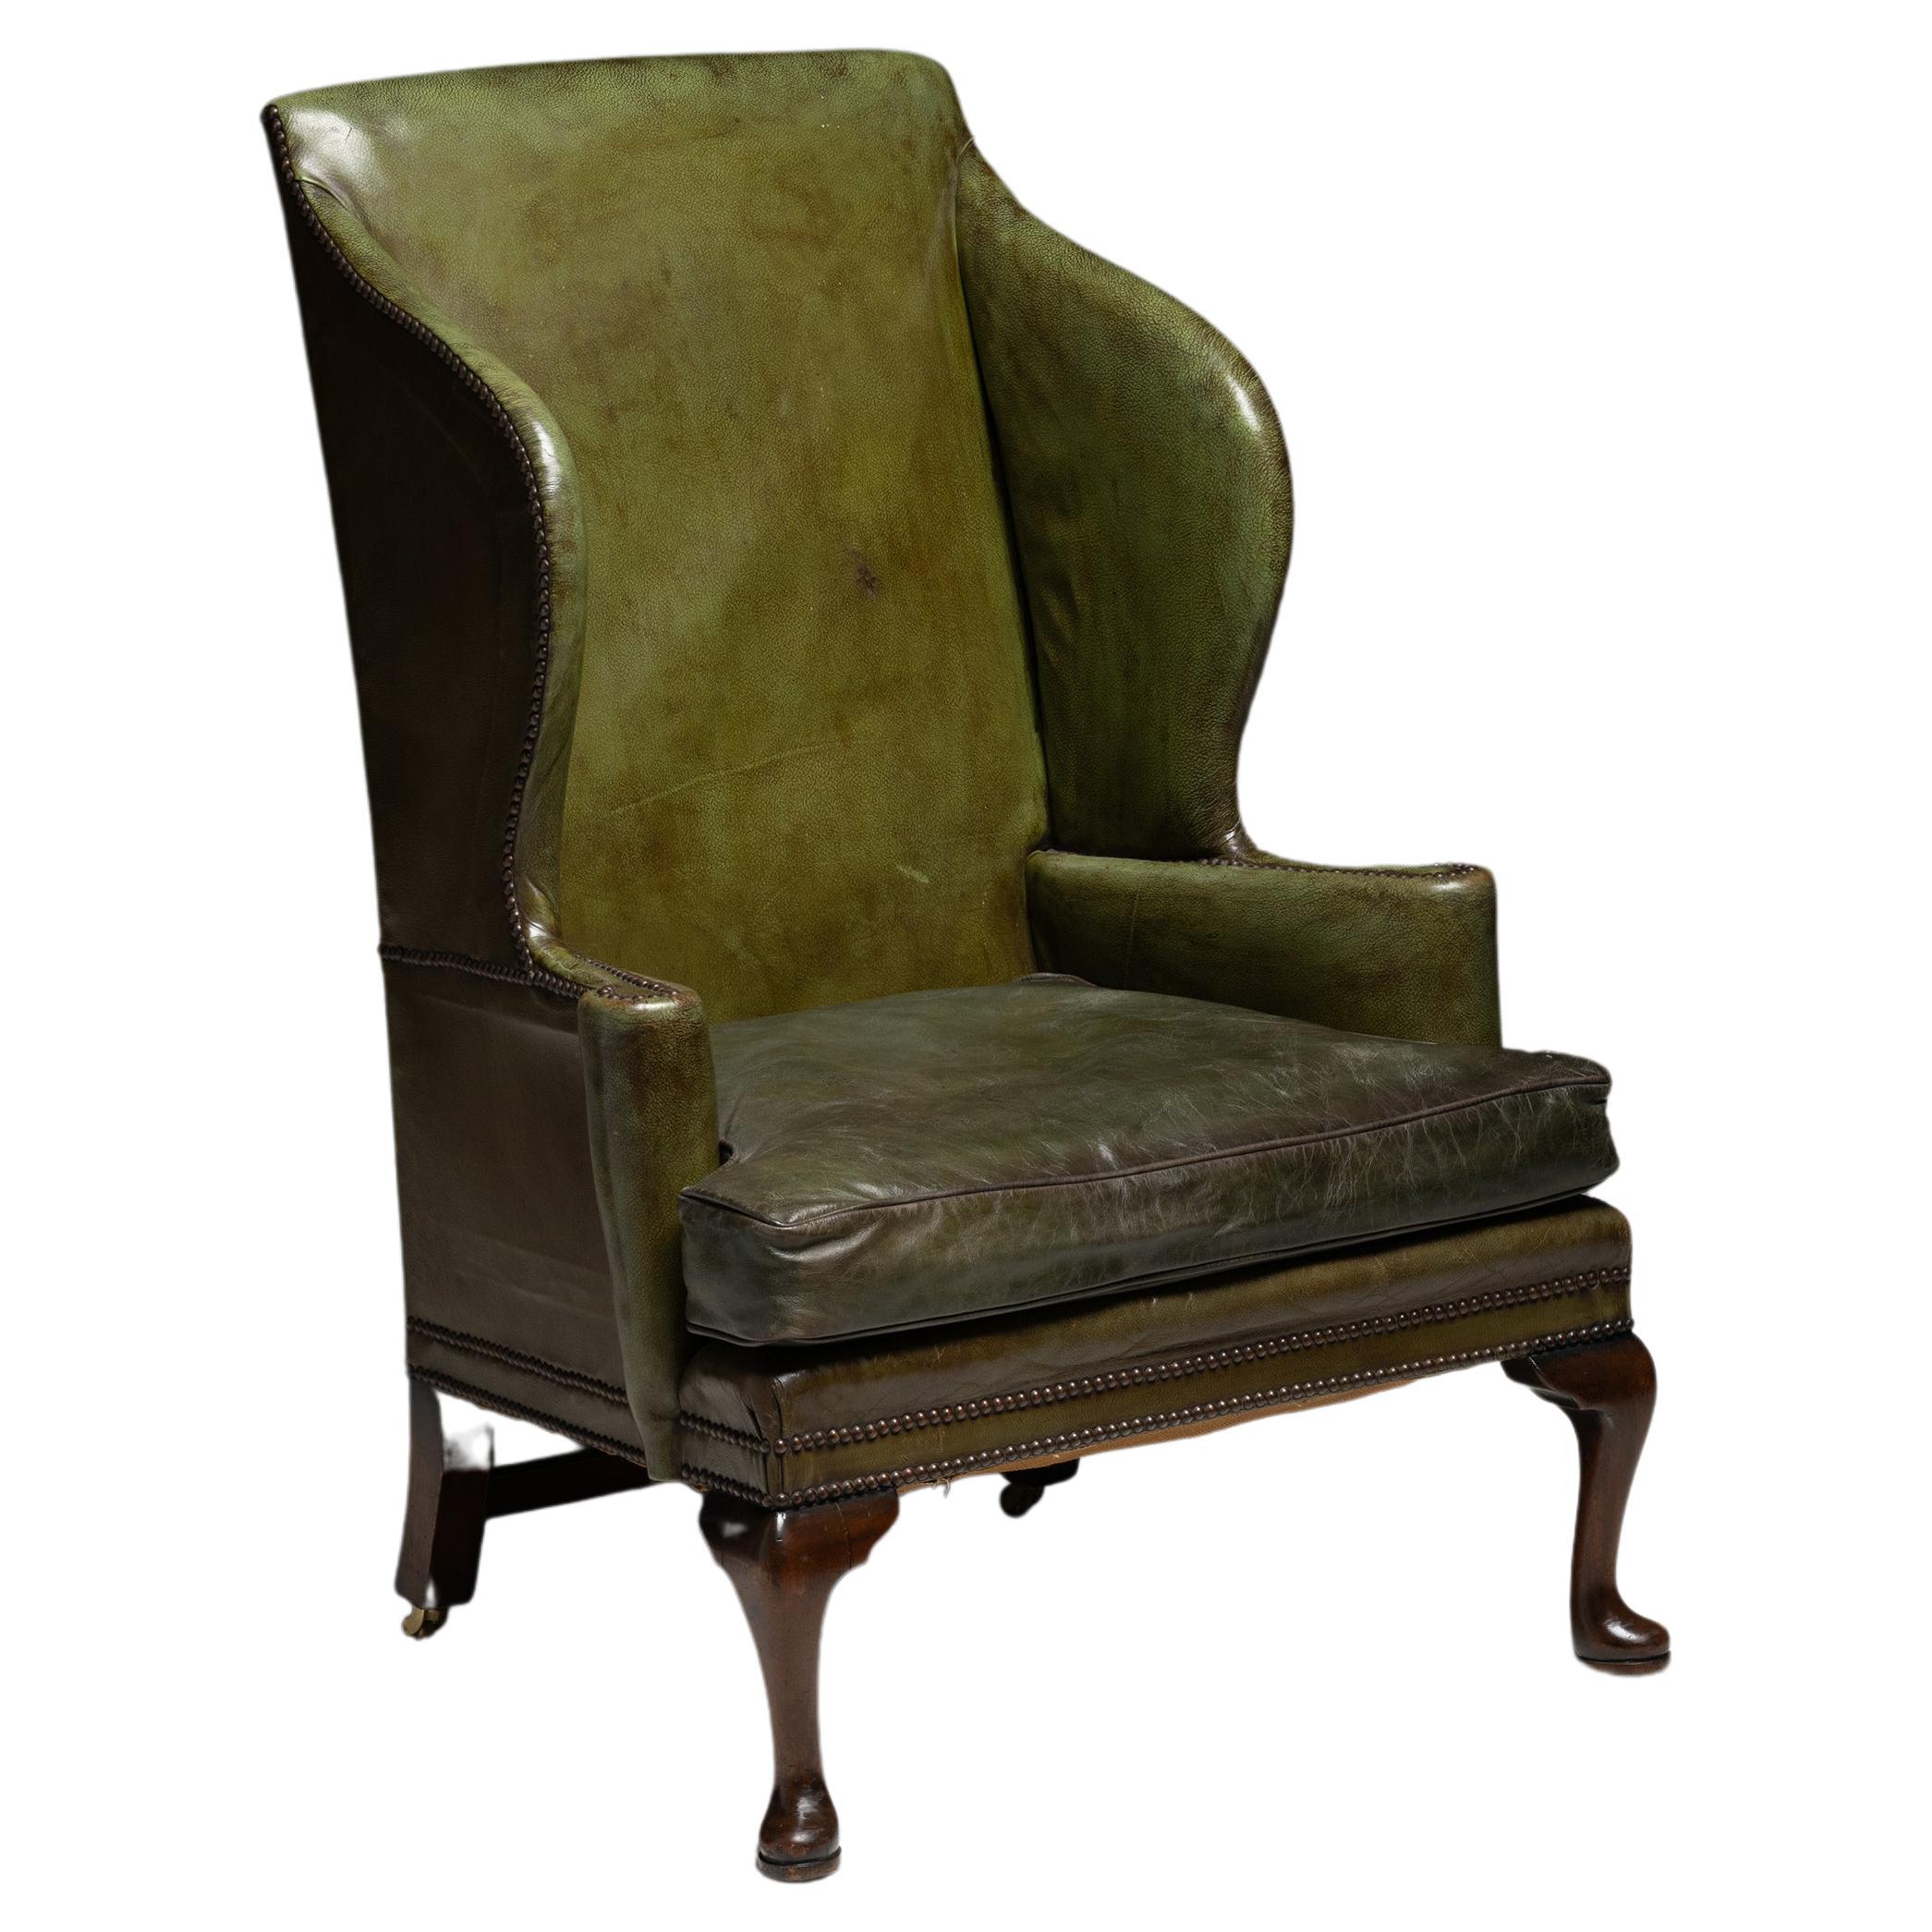 What are wingback chairs called?